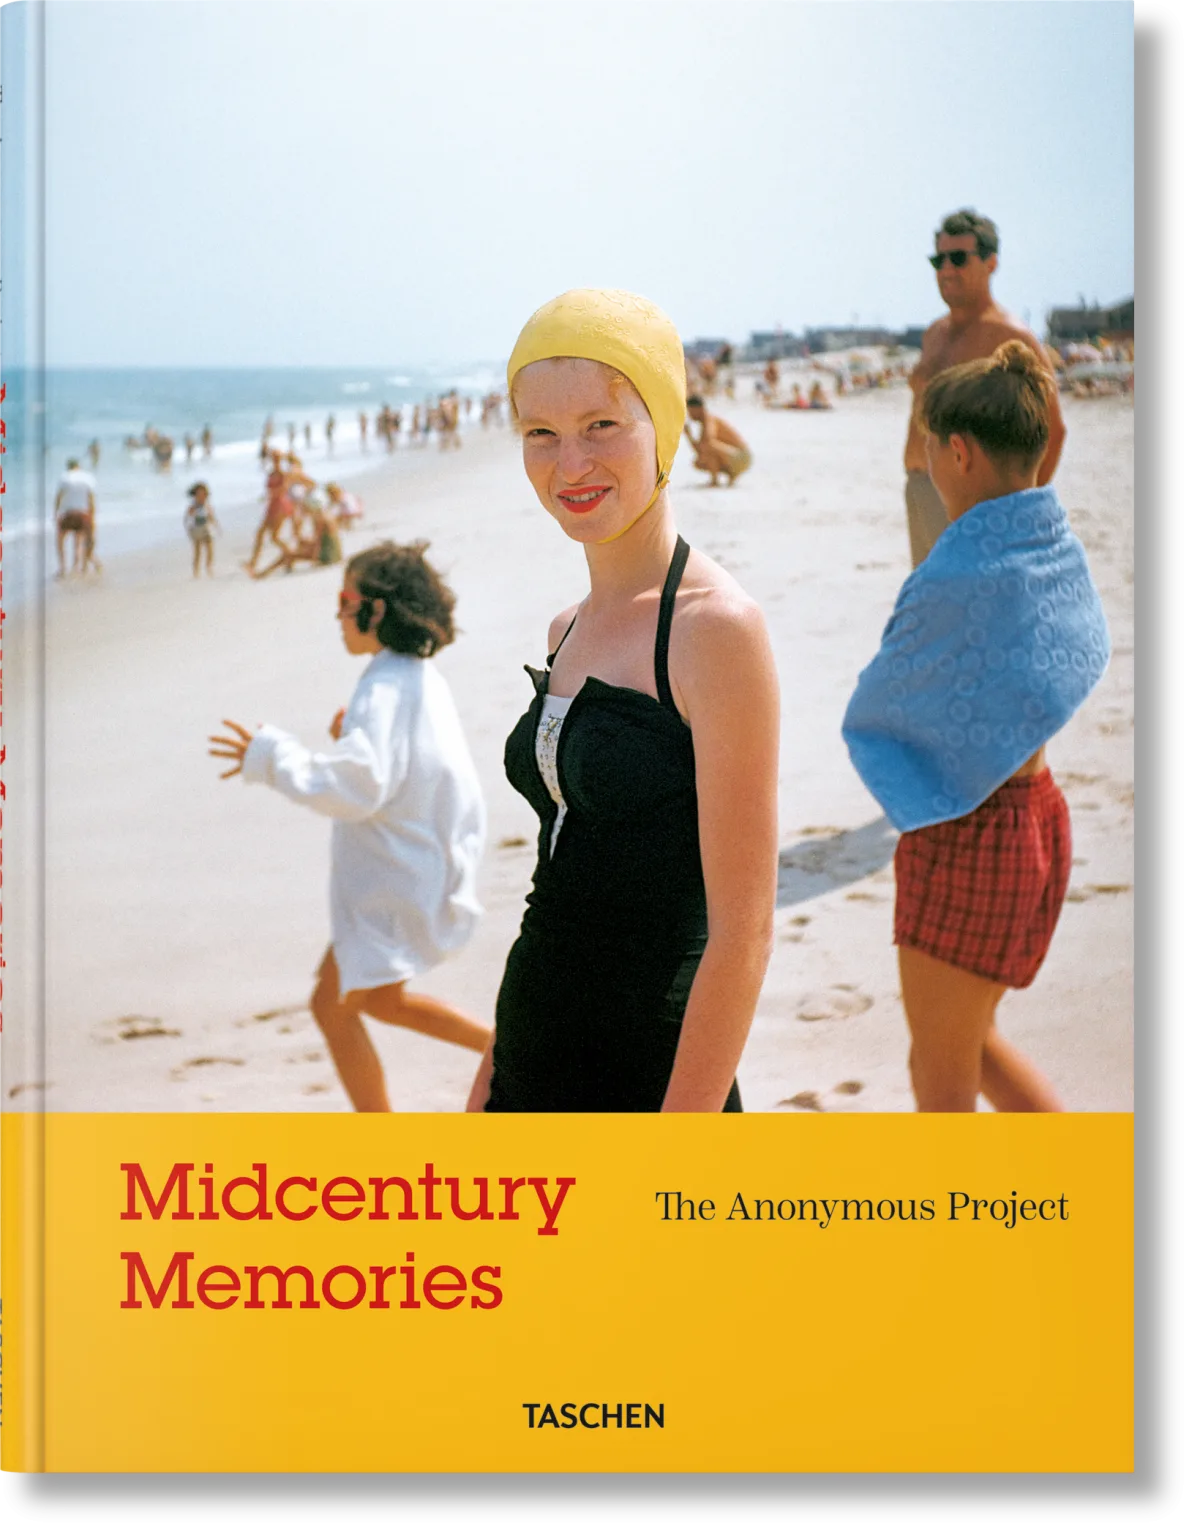 Midcentury Memories. The Anonymous Project